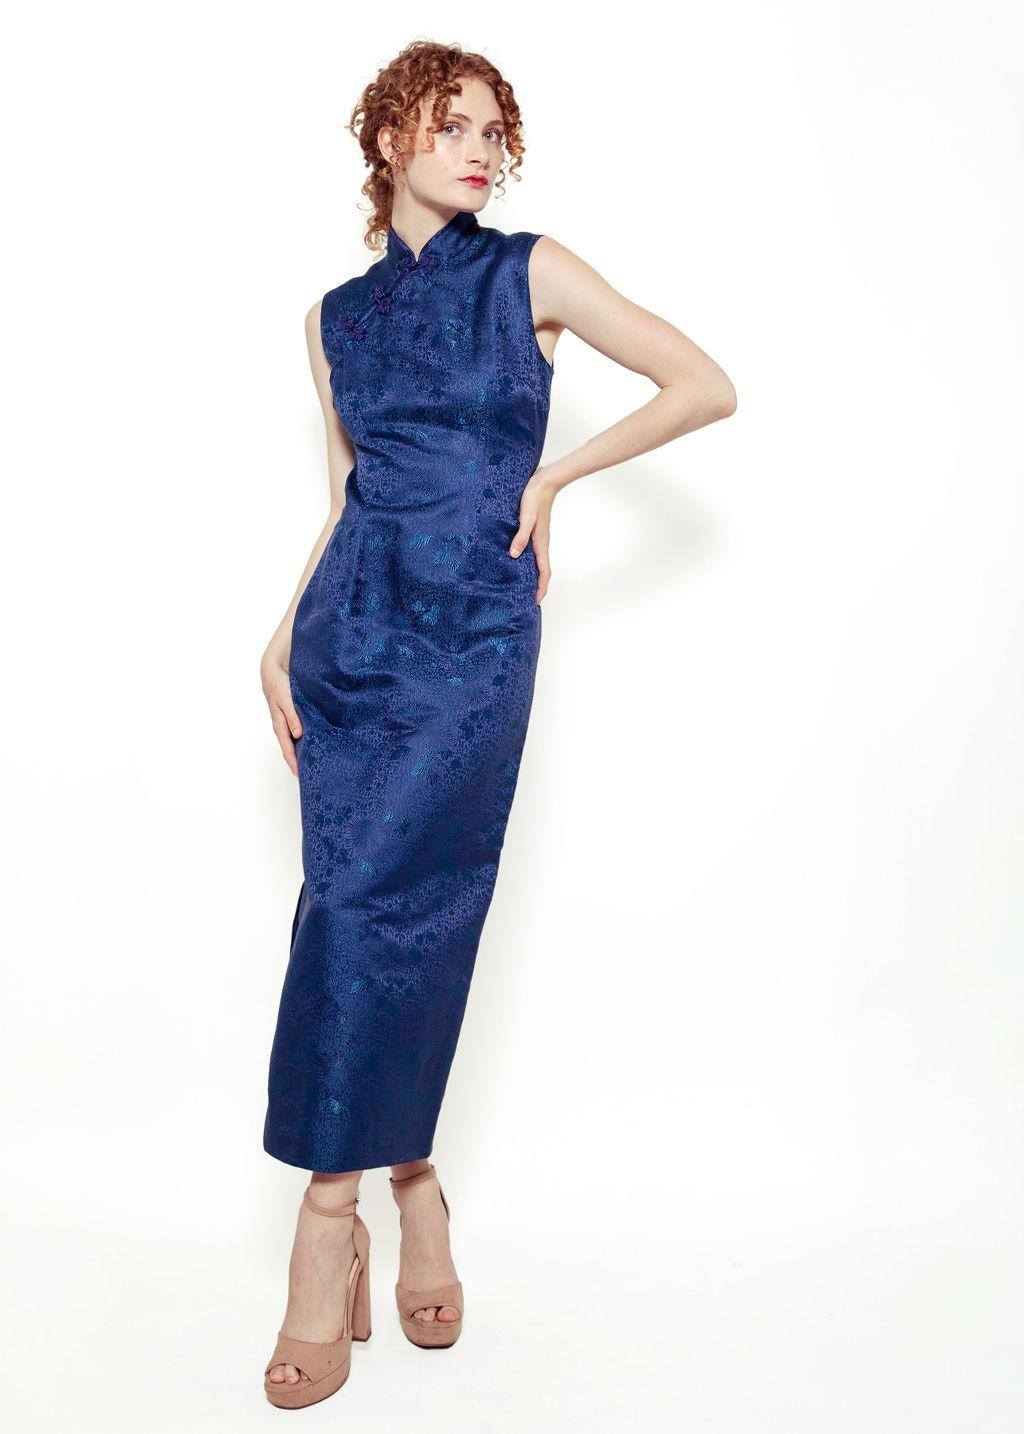 This Cheongsam Brocade Dress is fit for a royal.

The beautiful Midnight blue combined with the intricate floral brocade fabric will make you feel and look your best. This dress is pretty structured and does not have much stretch. 

In great vintage